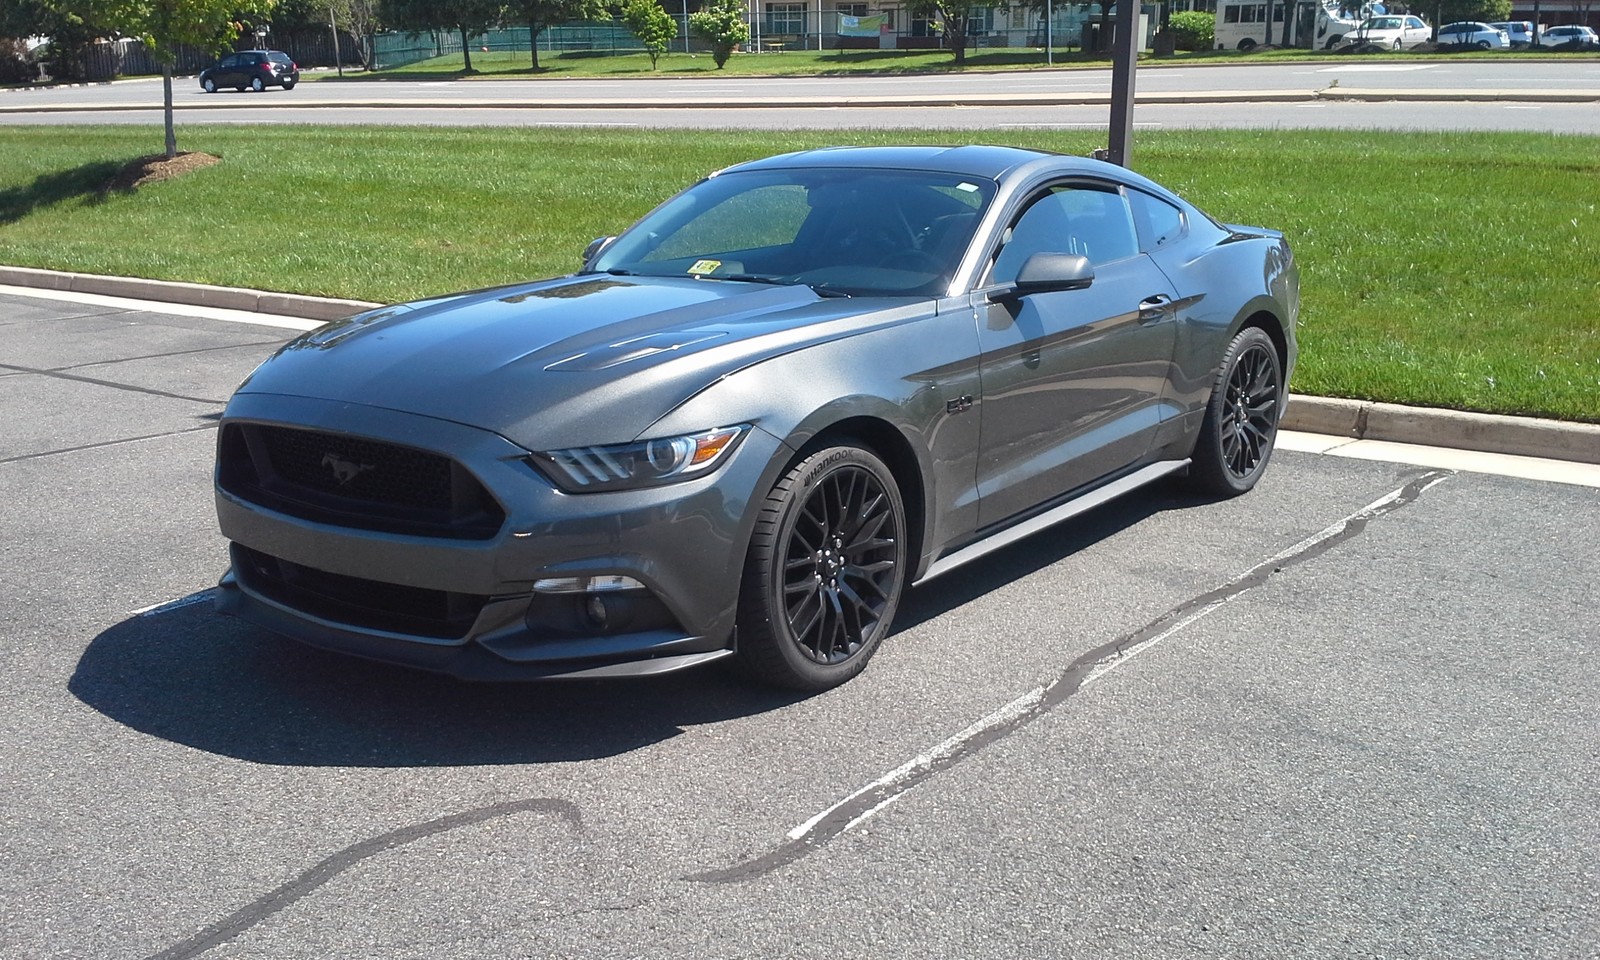 2015 Ford Mustang GT 1/4 mile Drag Racing timeslip specs 0-60